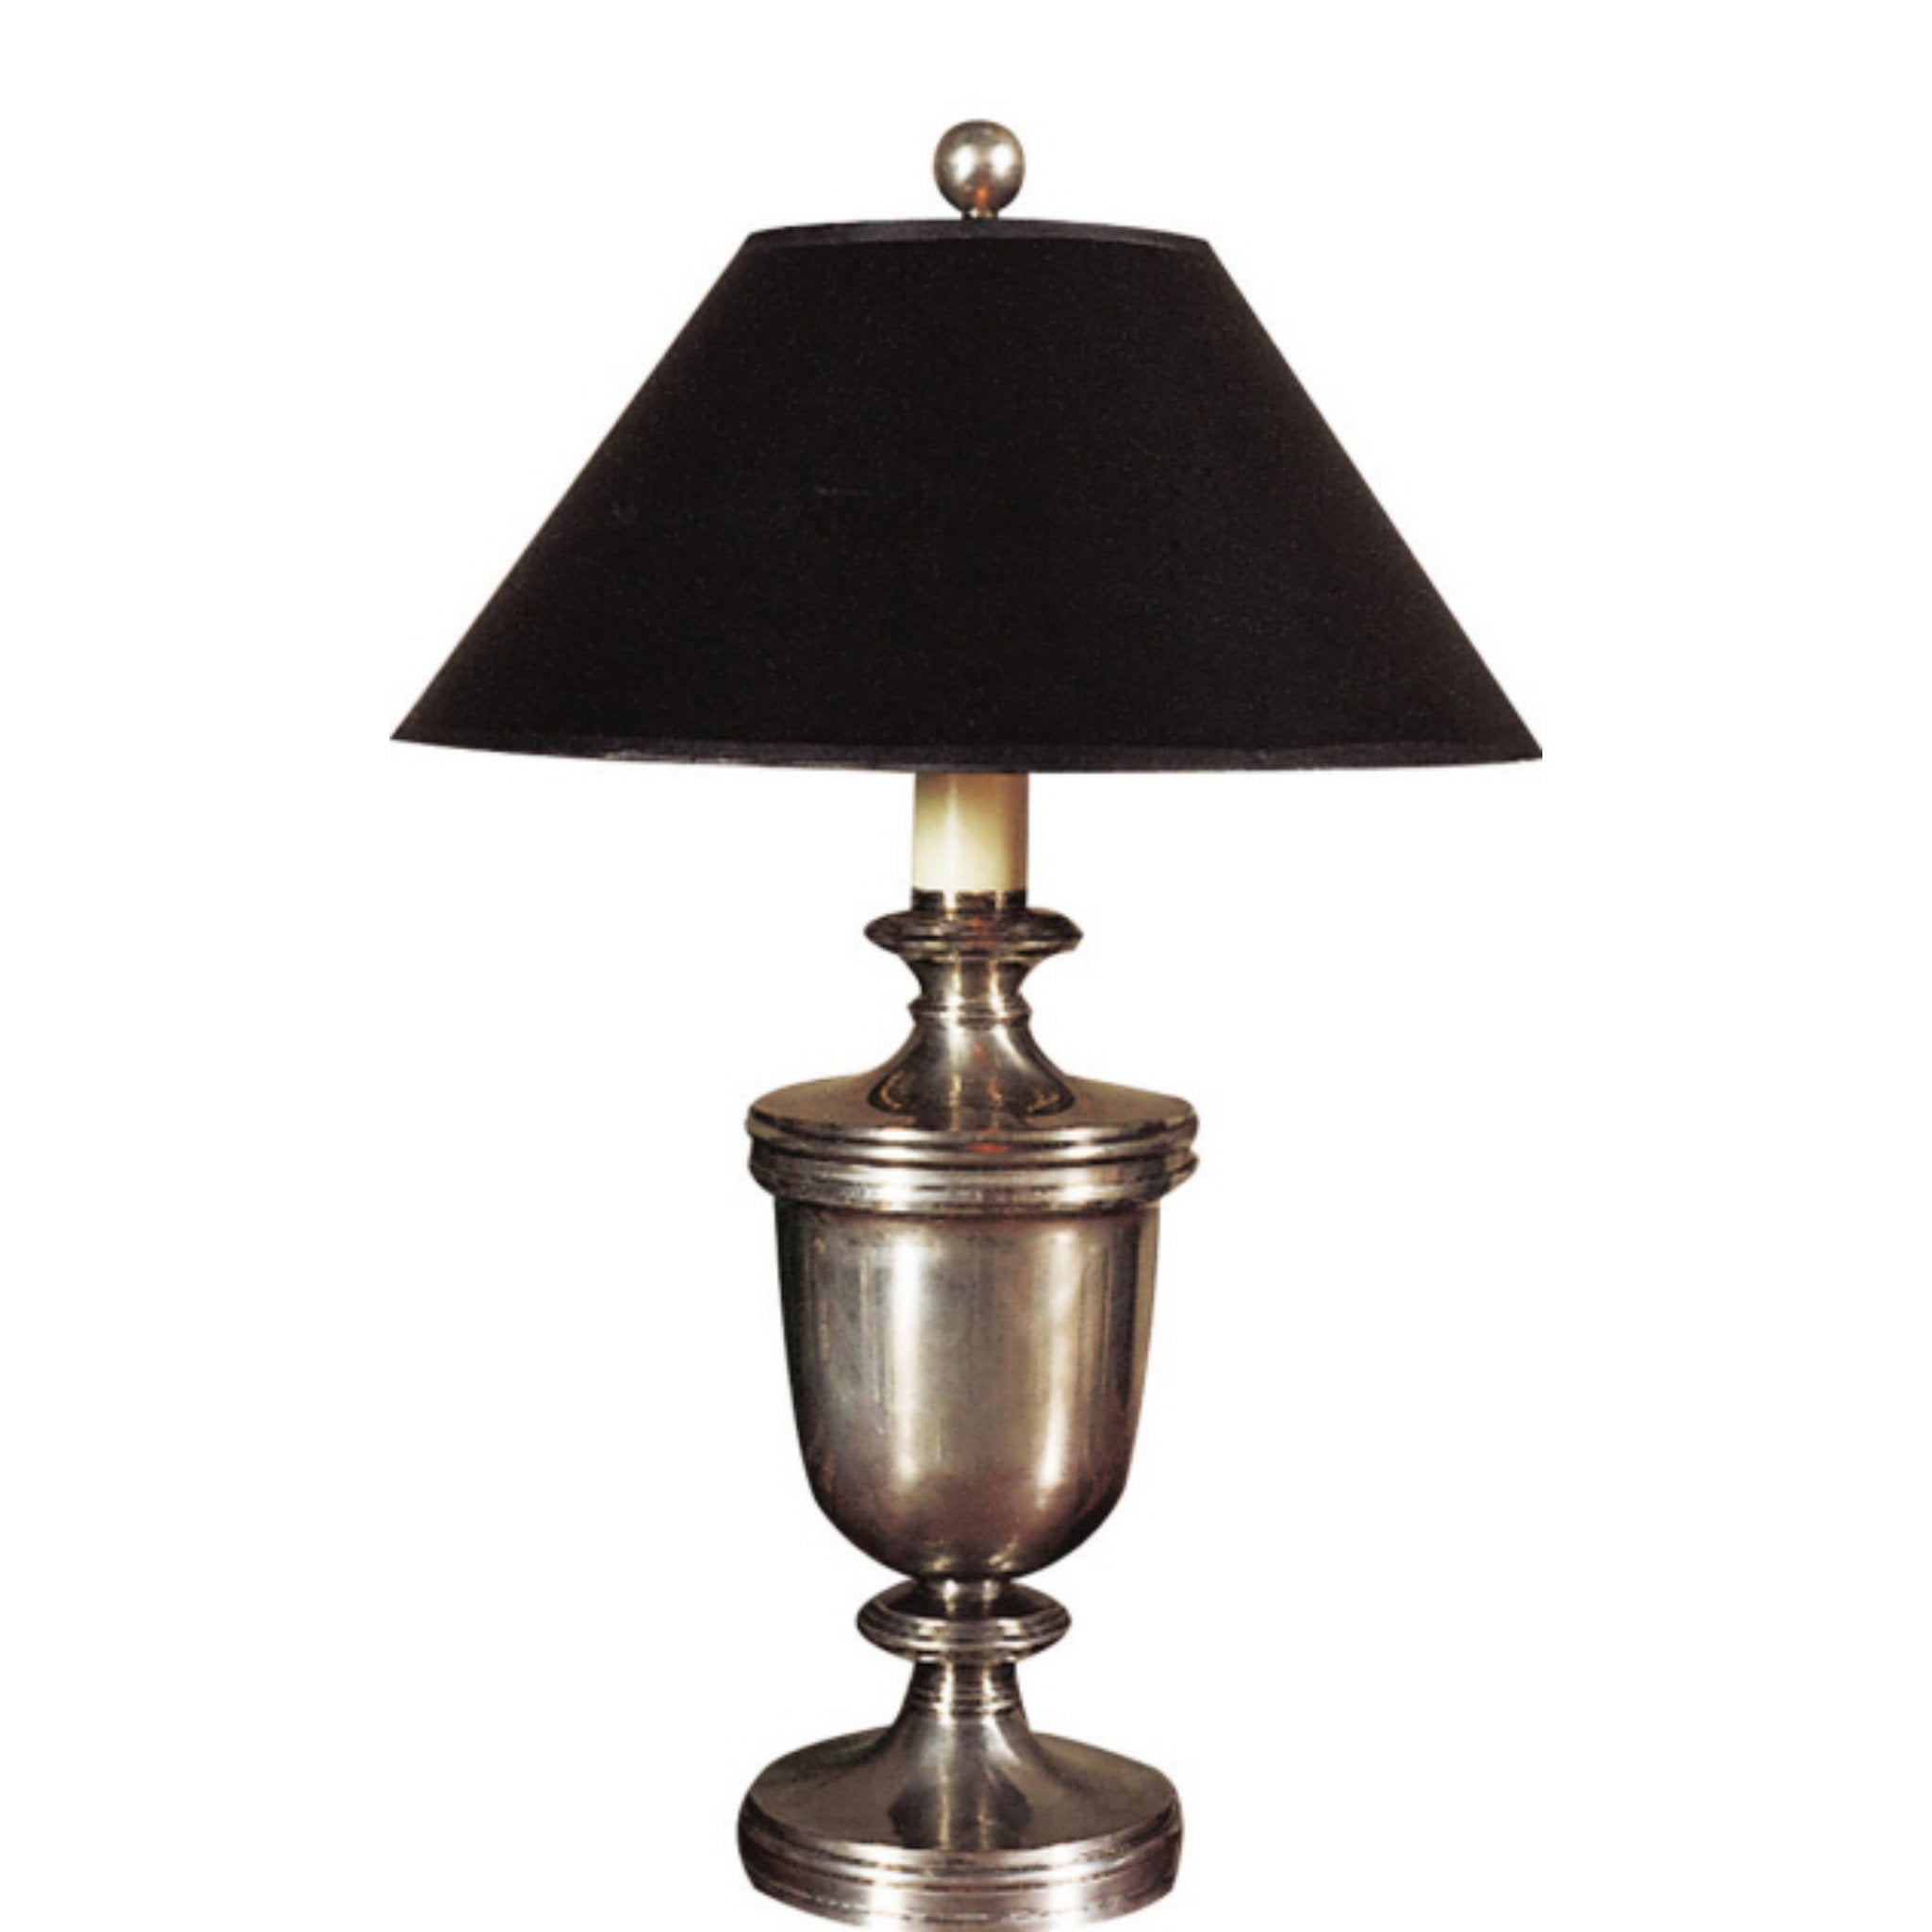 Chapman & Myers Classical Urn Form Medium Table Lamp in Antique Nickel with Black Shade